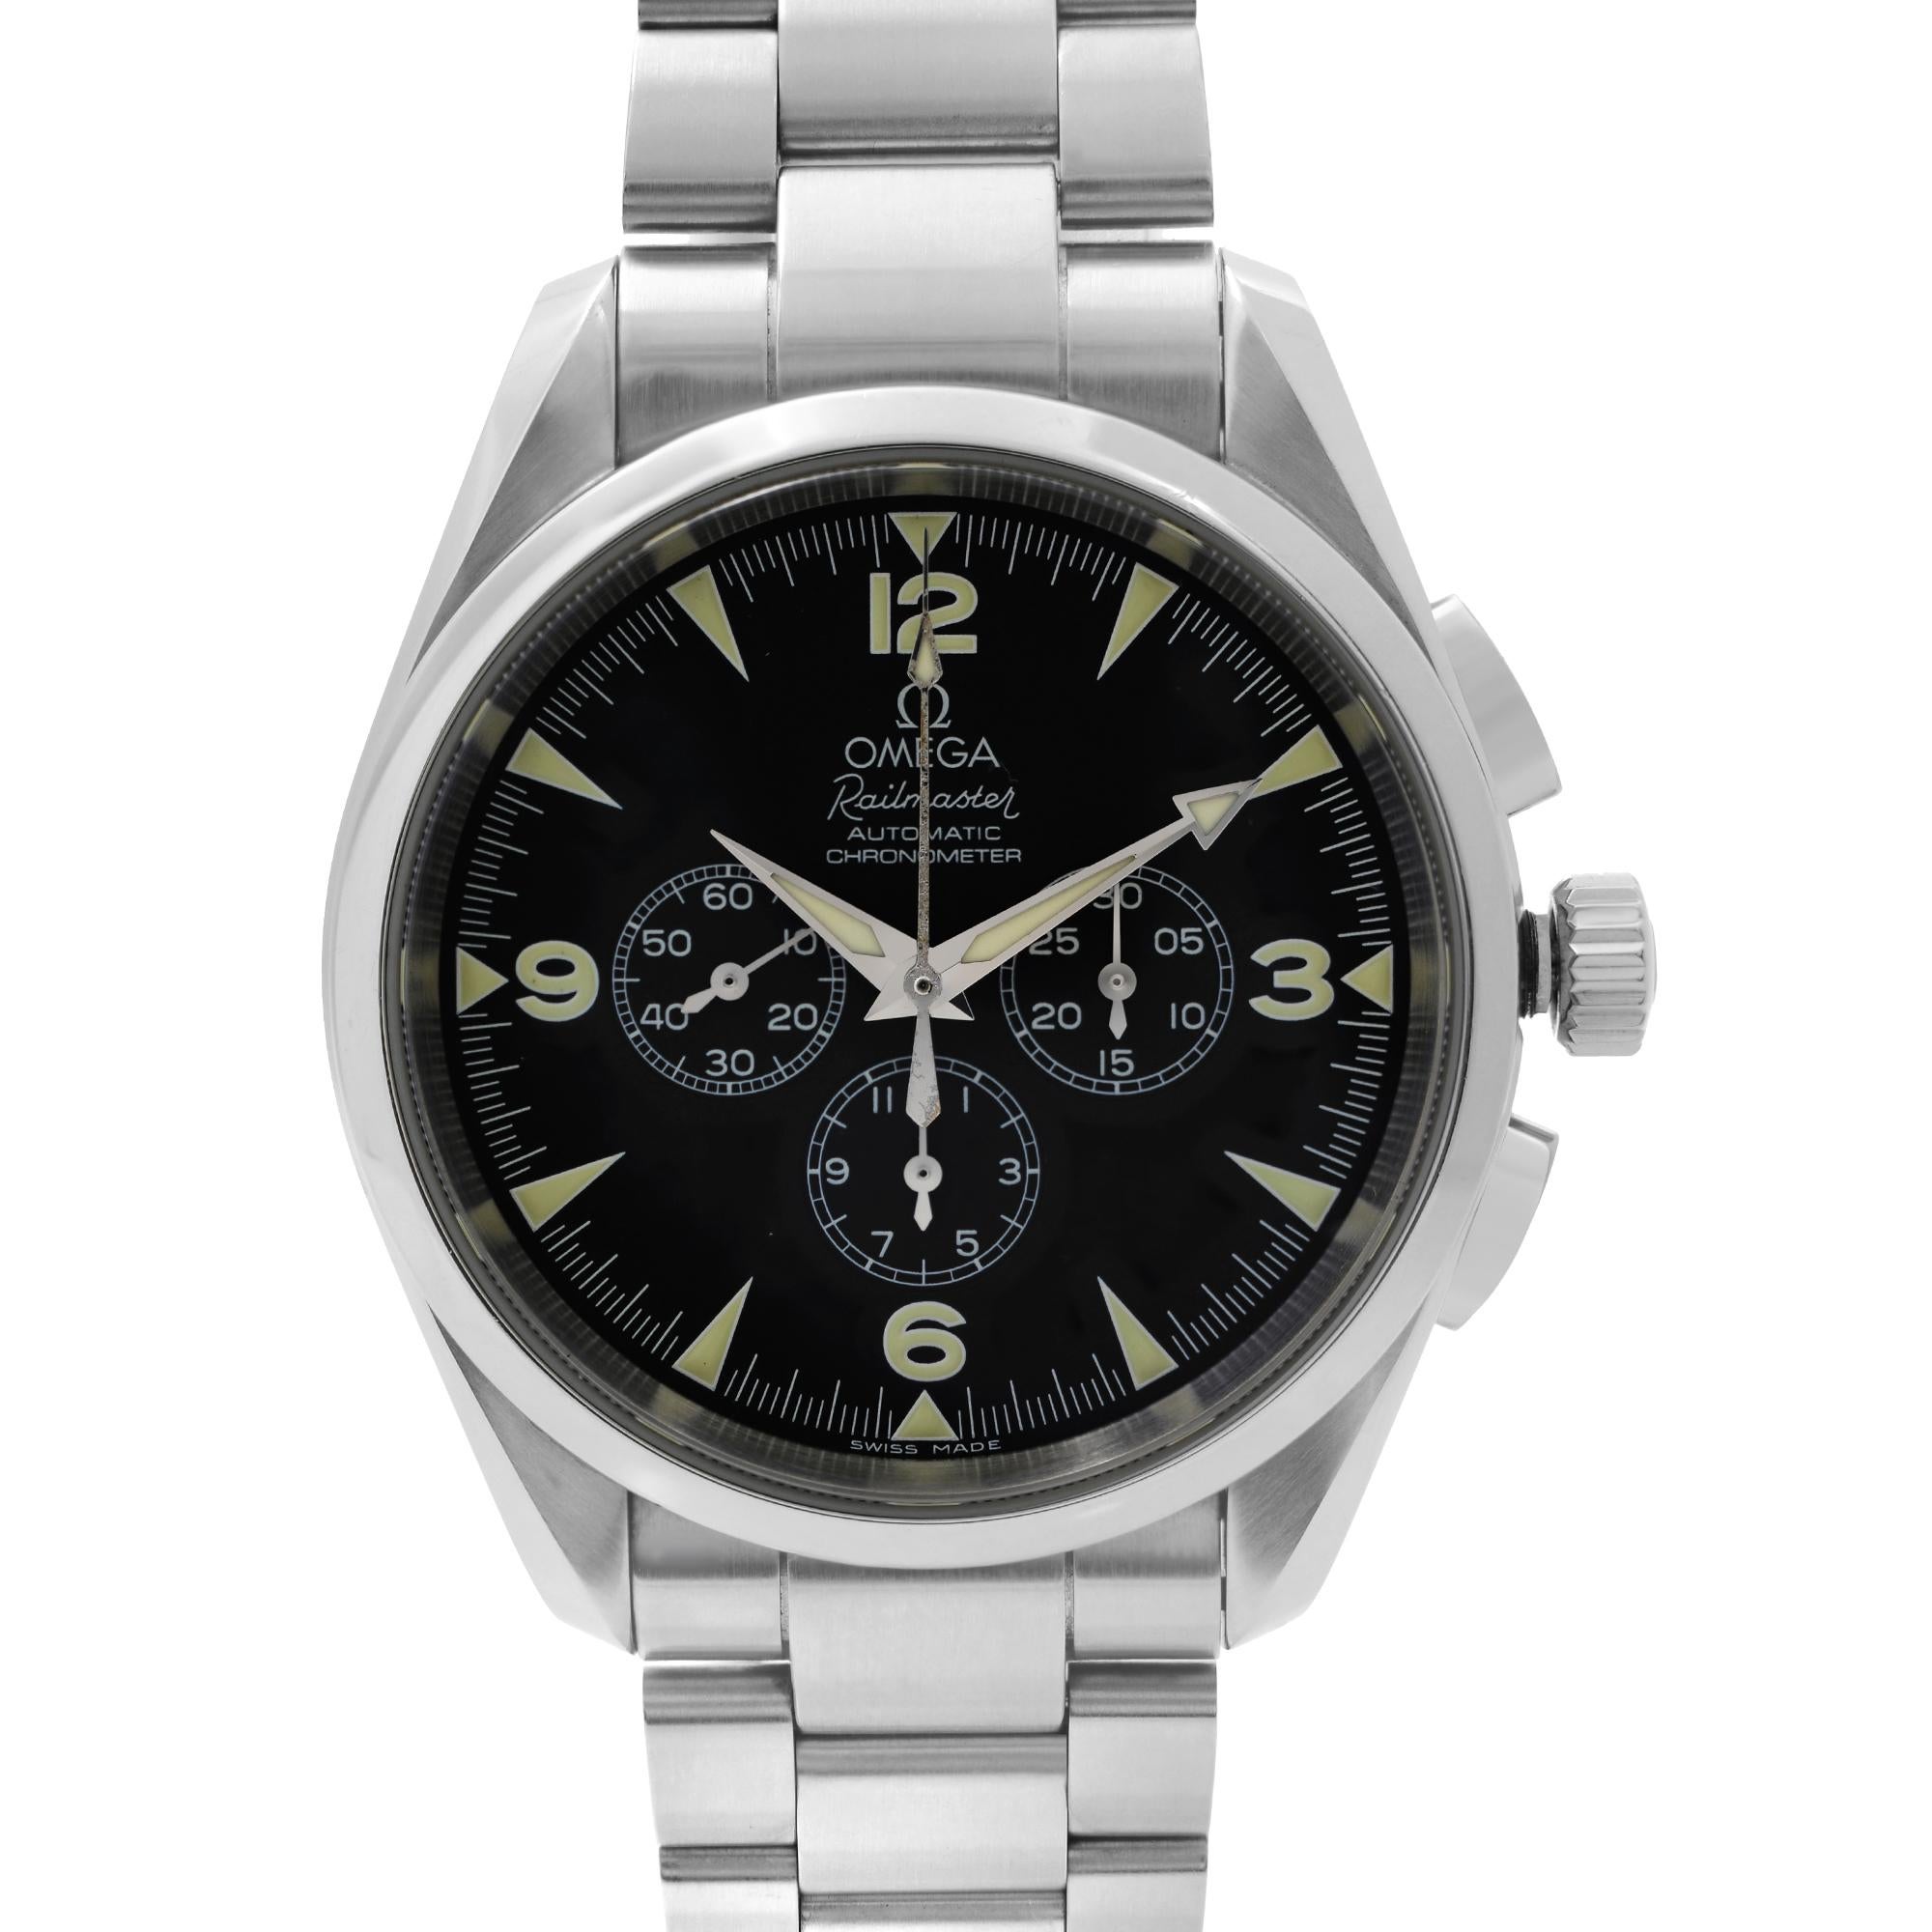 Pre Owned Omega Seamaster Railmaster Aqua Terra Black Dial Automatic Men's Watch 2512.52.00. This Beautiful Timepiece is Powered by Mechanical (Automatic) Movement And Features: Round Stainless Steel Case & Bracelet, Fixed Smooth Stainless Steel